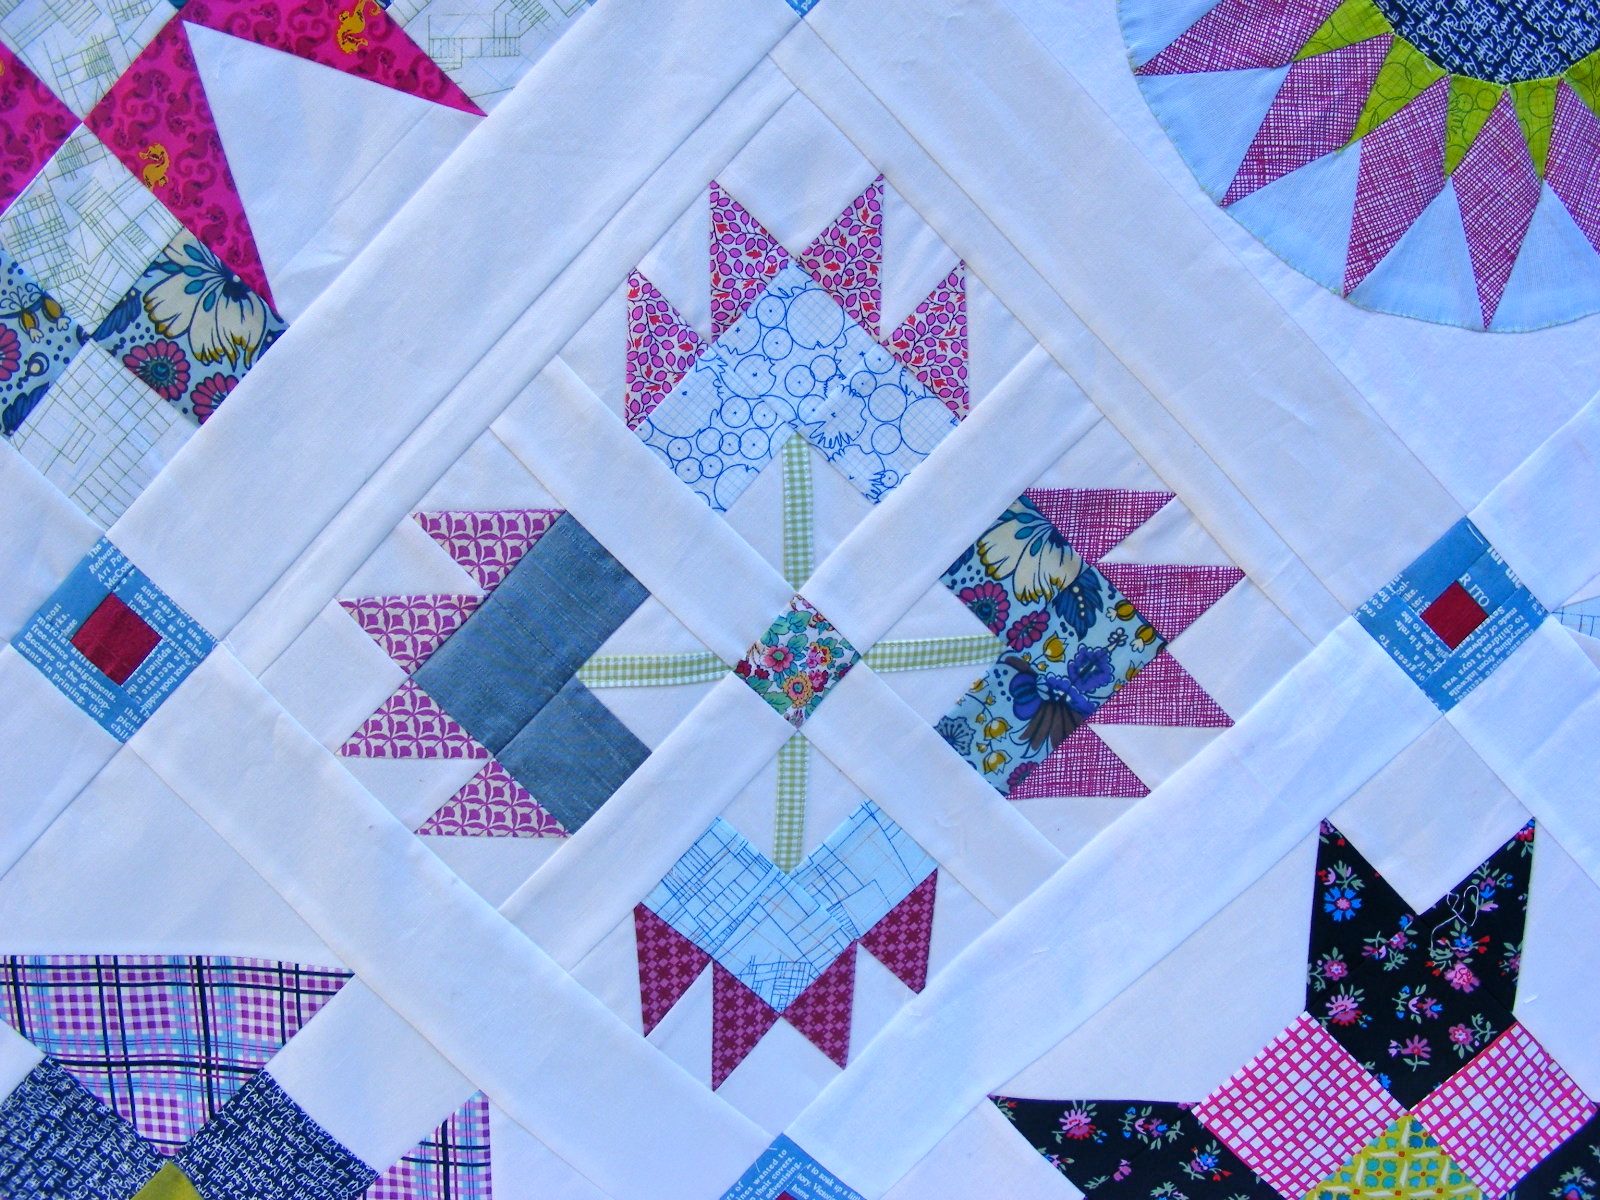 Kansas - Block 10 of 50 - Celebrating the States! - Block of the Month - a  4+ year quilt project! 